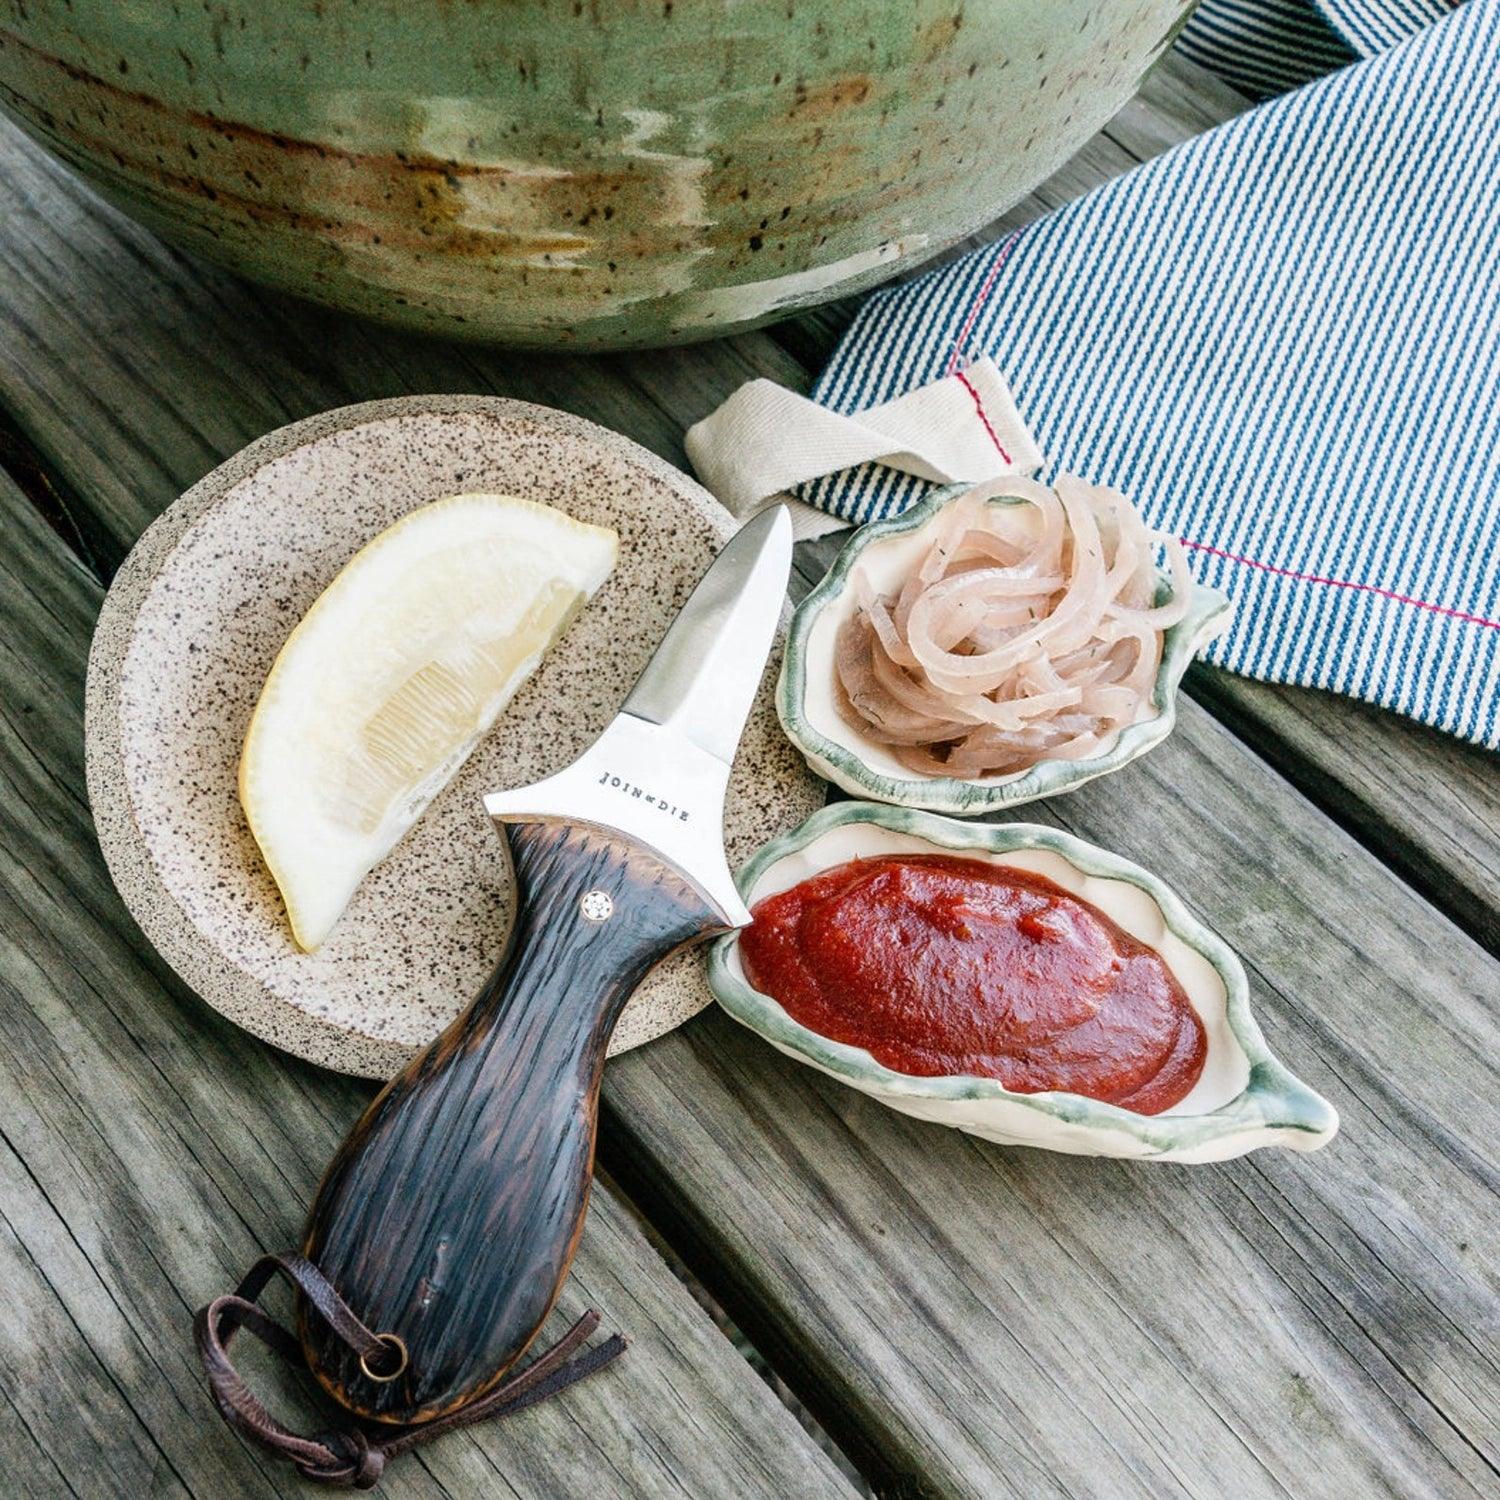 Bourbon Barrel Oyster Knife - Southern Crafted